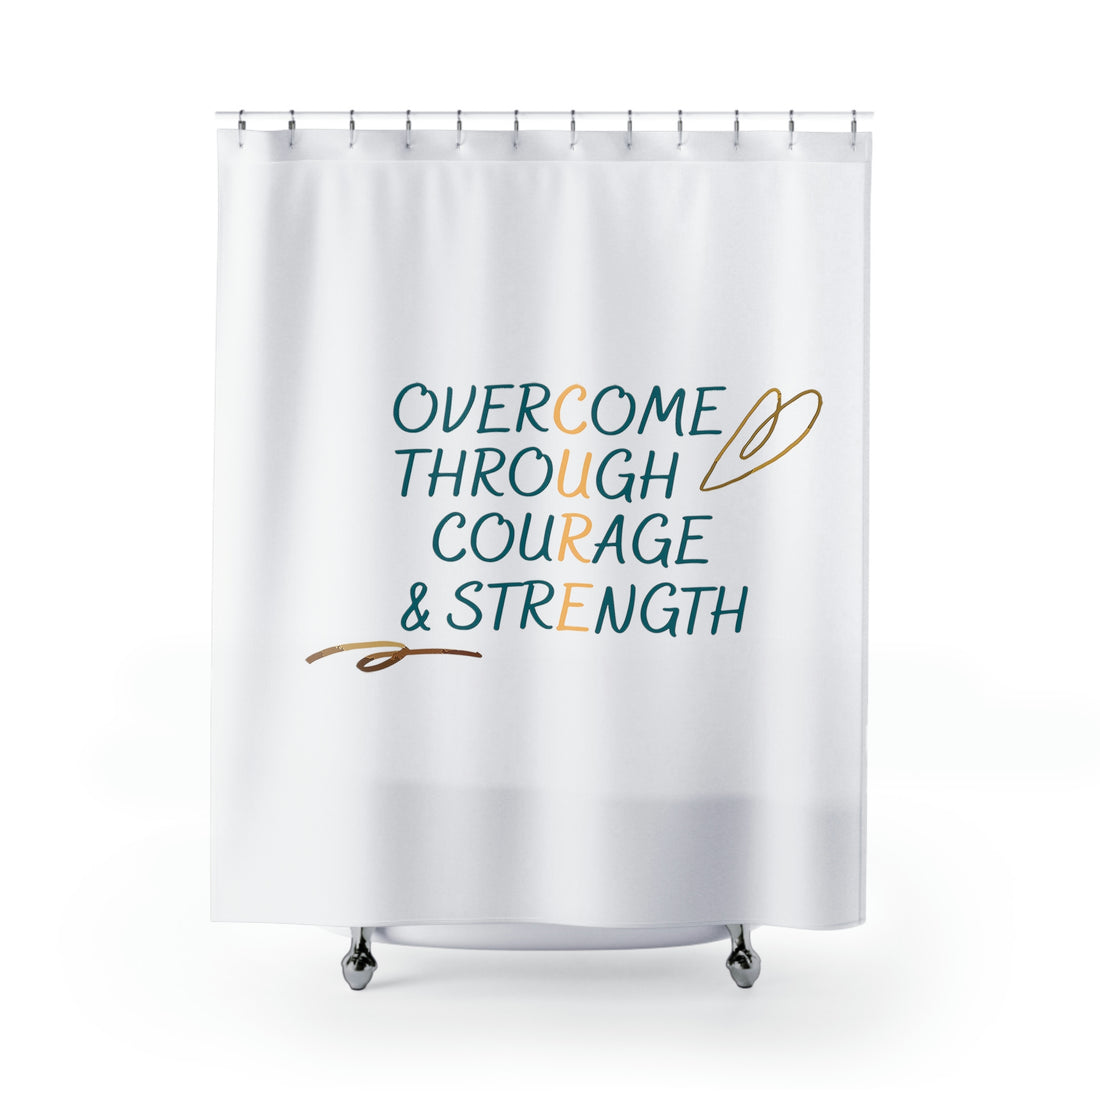 Overcome Through Courage and Strength - White Shower Curtain